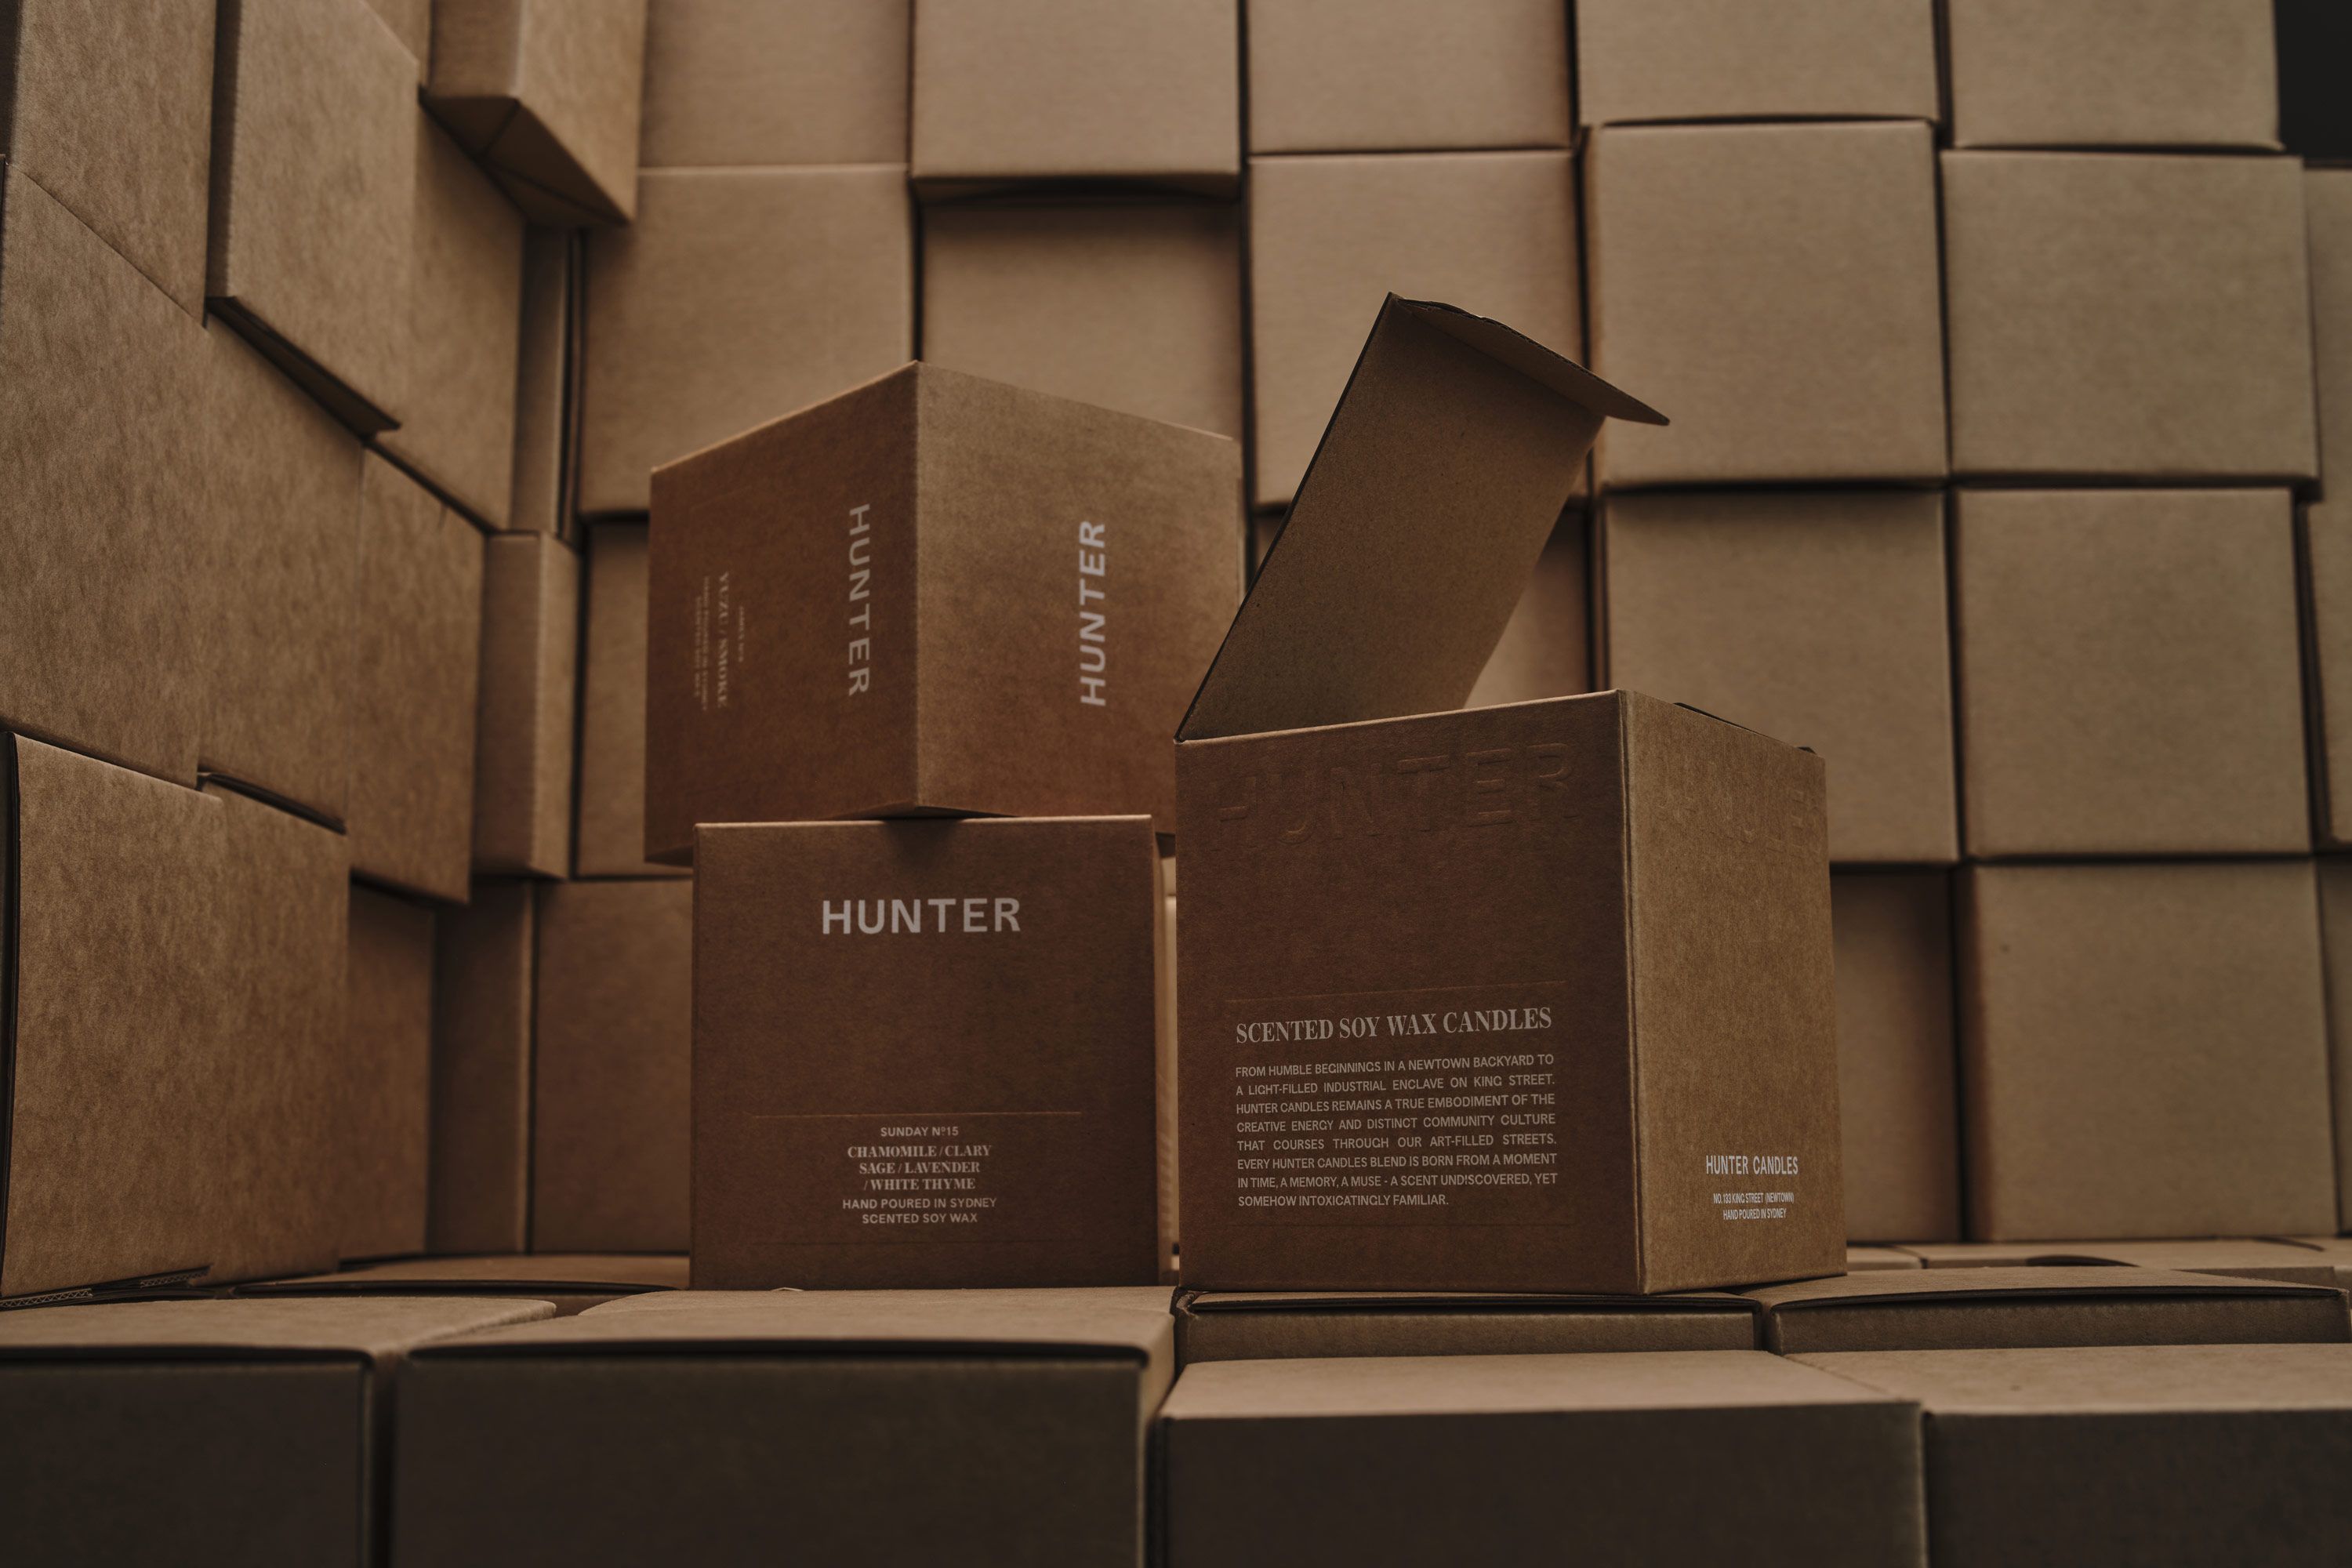 Porter manages the process from concept to delivery so you can focus on your business